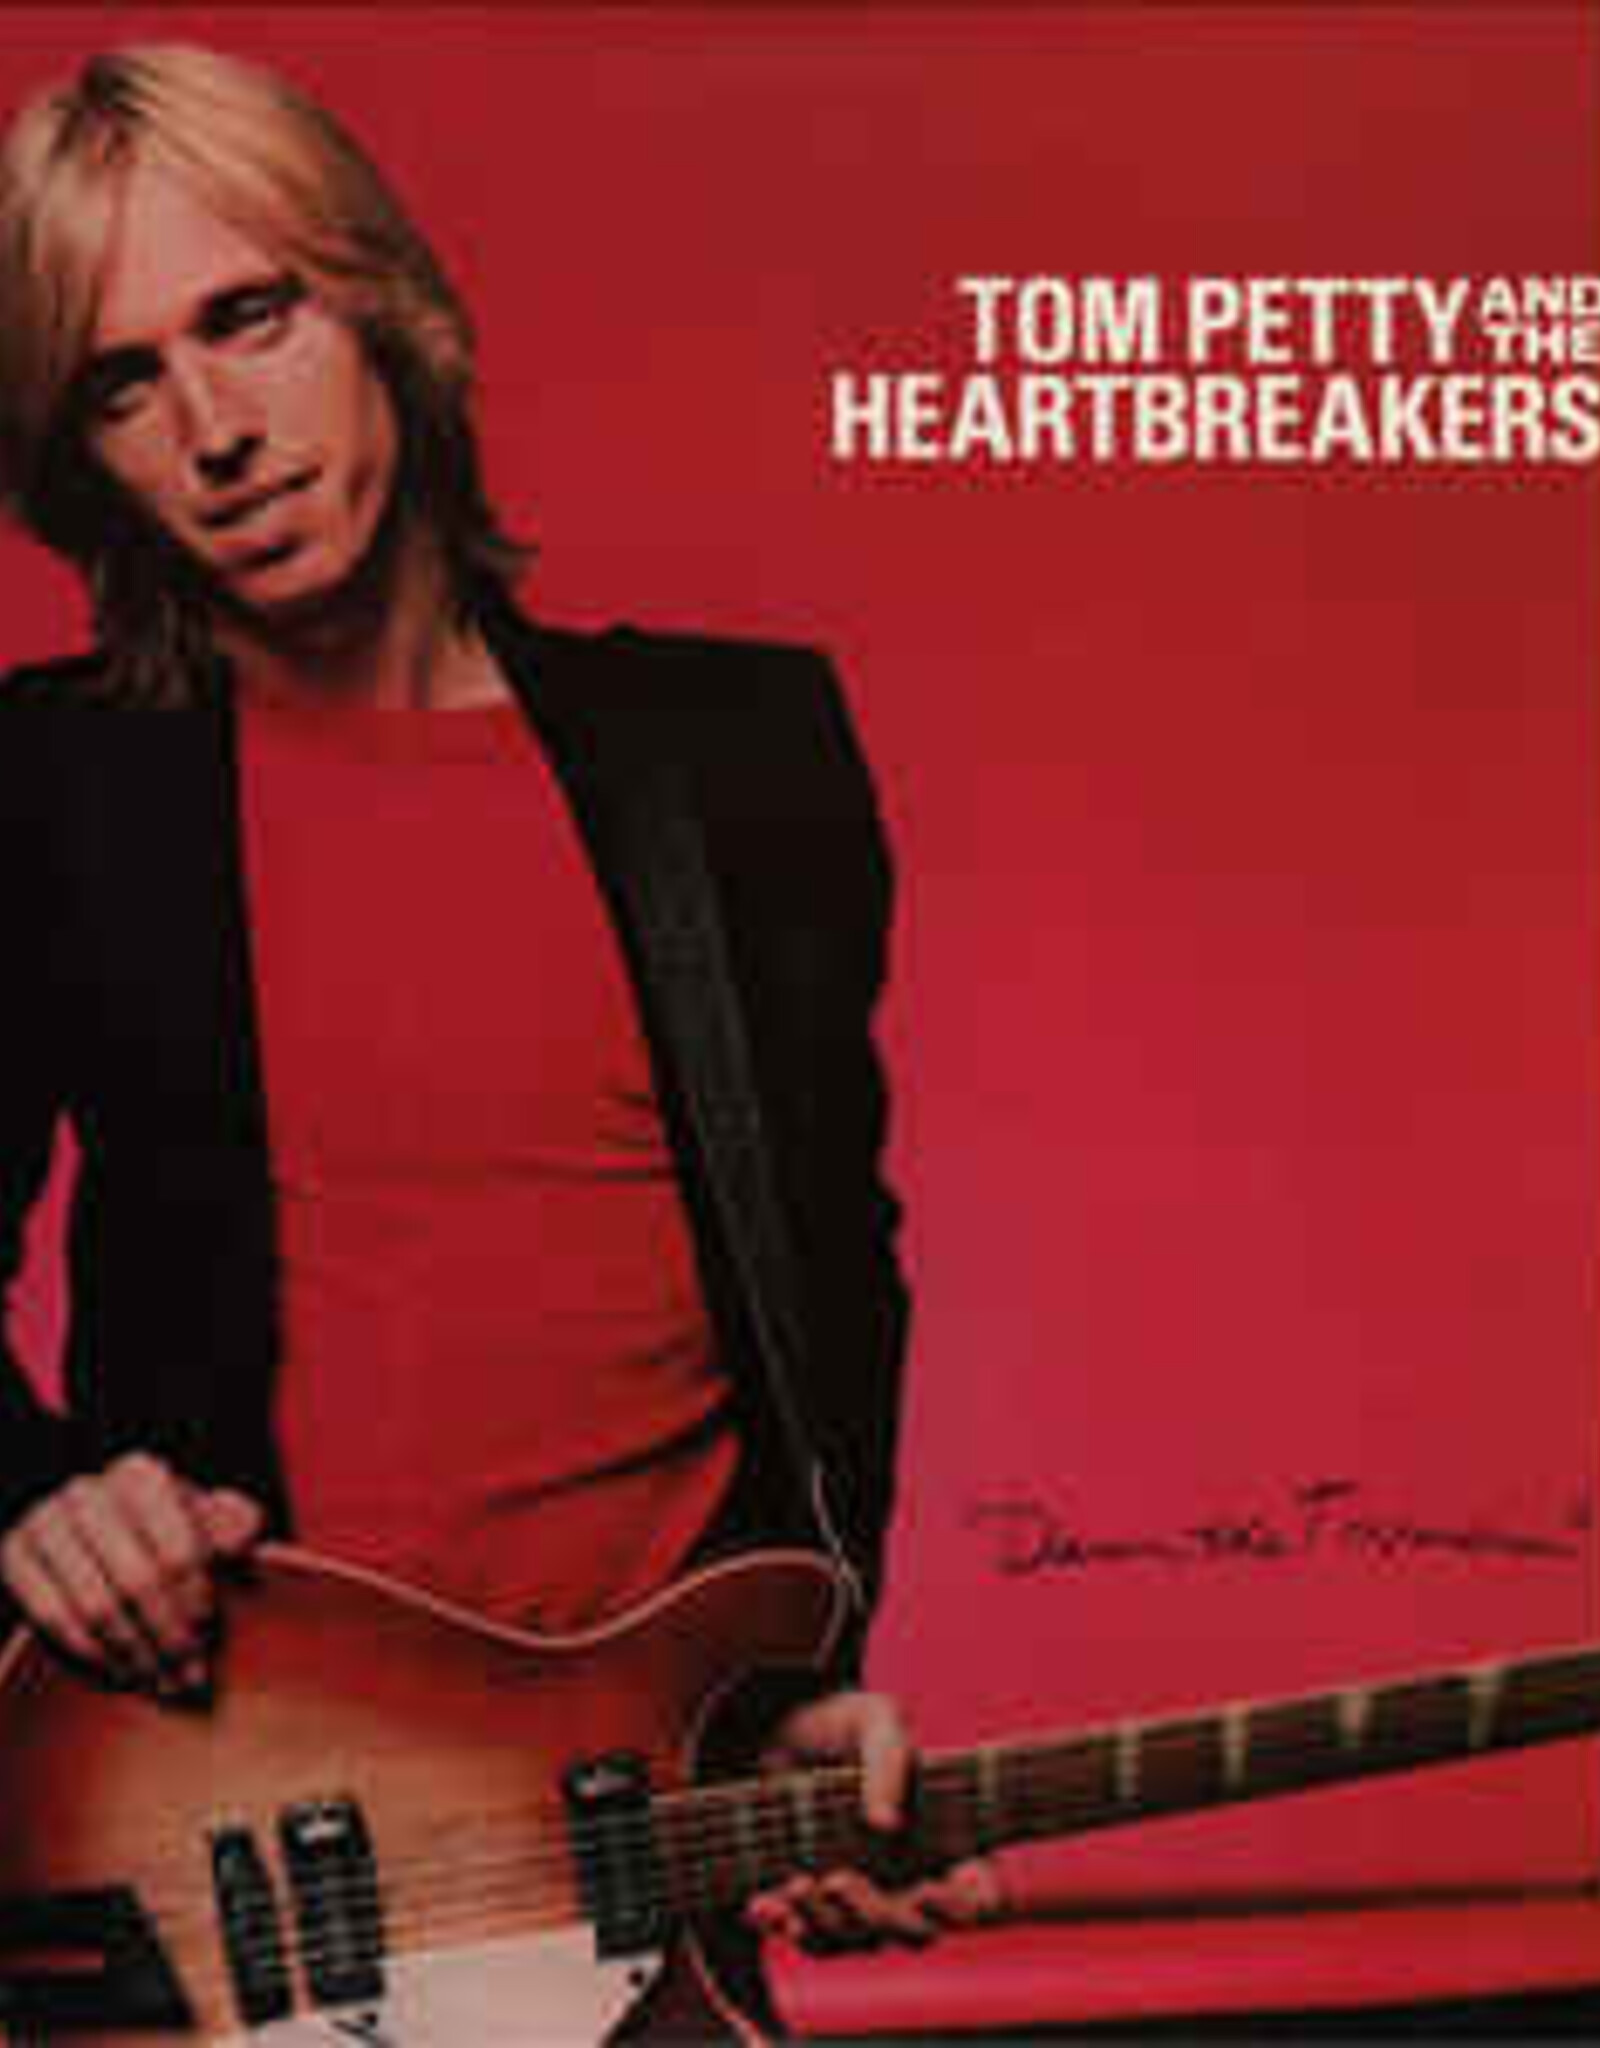 Tom Petty and the Heartbreakers - Damn the Torpedoes